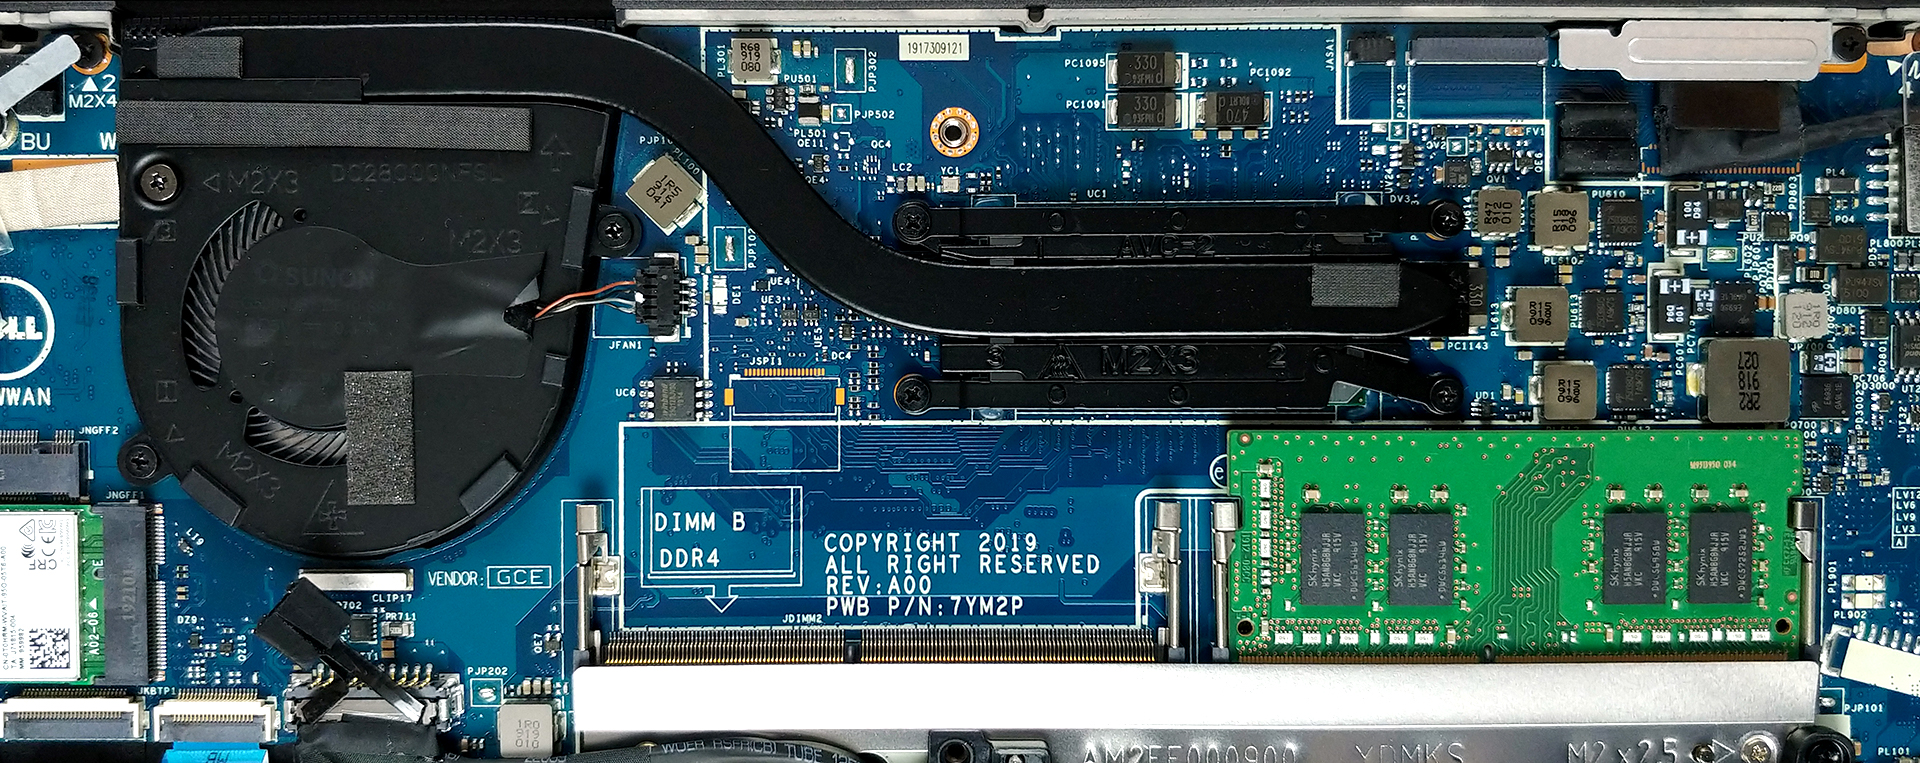 Inside Dell Latitude 14 7400 - disassembly and upgrade options |  